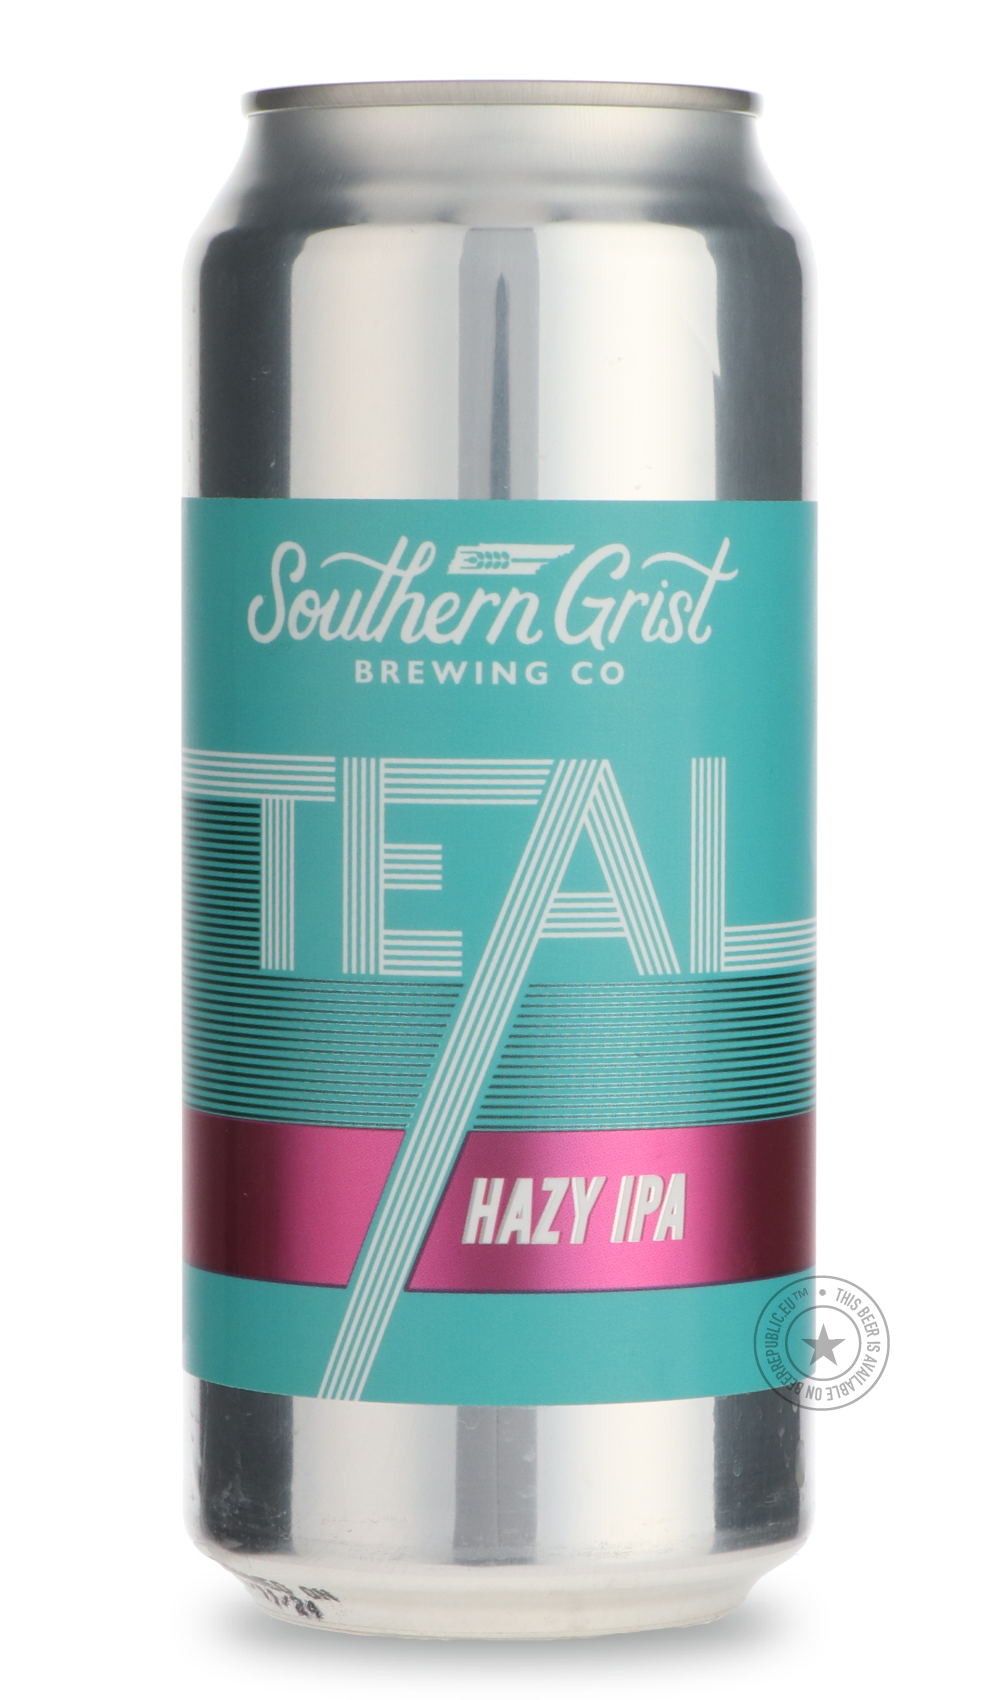 -Southern Grist- TEAL-IPA- Only @ Beer Republic - The best online beer store for American & Canadian craft beer - Buy beer online from the USA and Canada - Bier online kopen - Amerikaans bier kopen - Craft beer store - Craft beer kopen - Amerikanisch bier kaufen - Bier online kaufen - Acheter biere online - IPA - Stout - Porter - New England IPA - Hazy IPA - Imperial Stout - Barrel Aged - Barrel Aged Imperial Stout - Brown - Dark beer - Blond - Blonde - Pilsner - Lager - Wheat - Weizen - Amber - Barley Wine